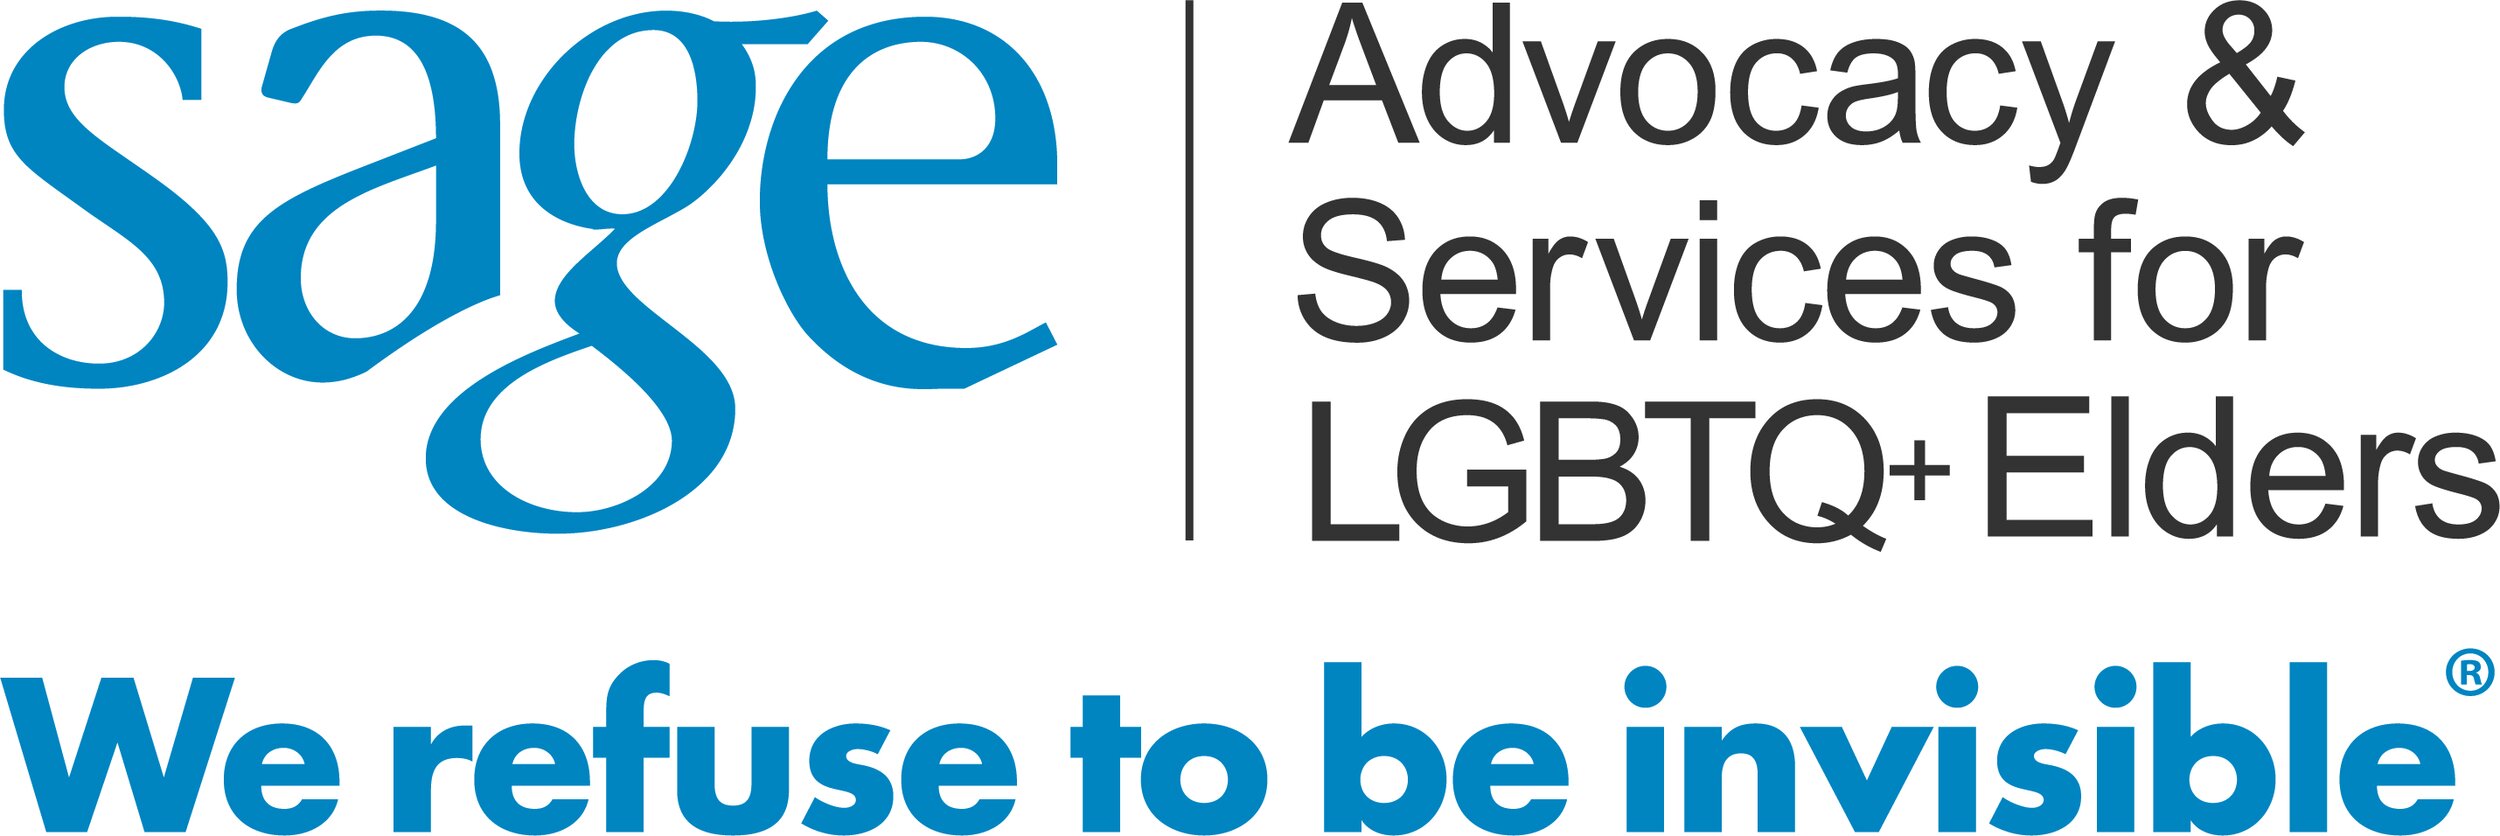 Services &amp; Advocacy for Gay Lesbian Bisexual &amp; Transgender Elders, Inc. (Copy)